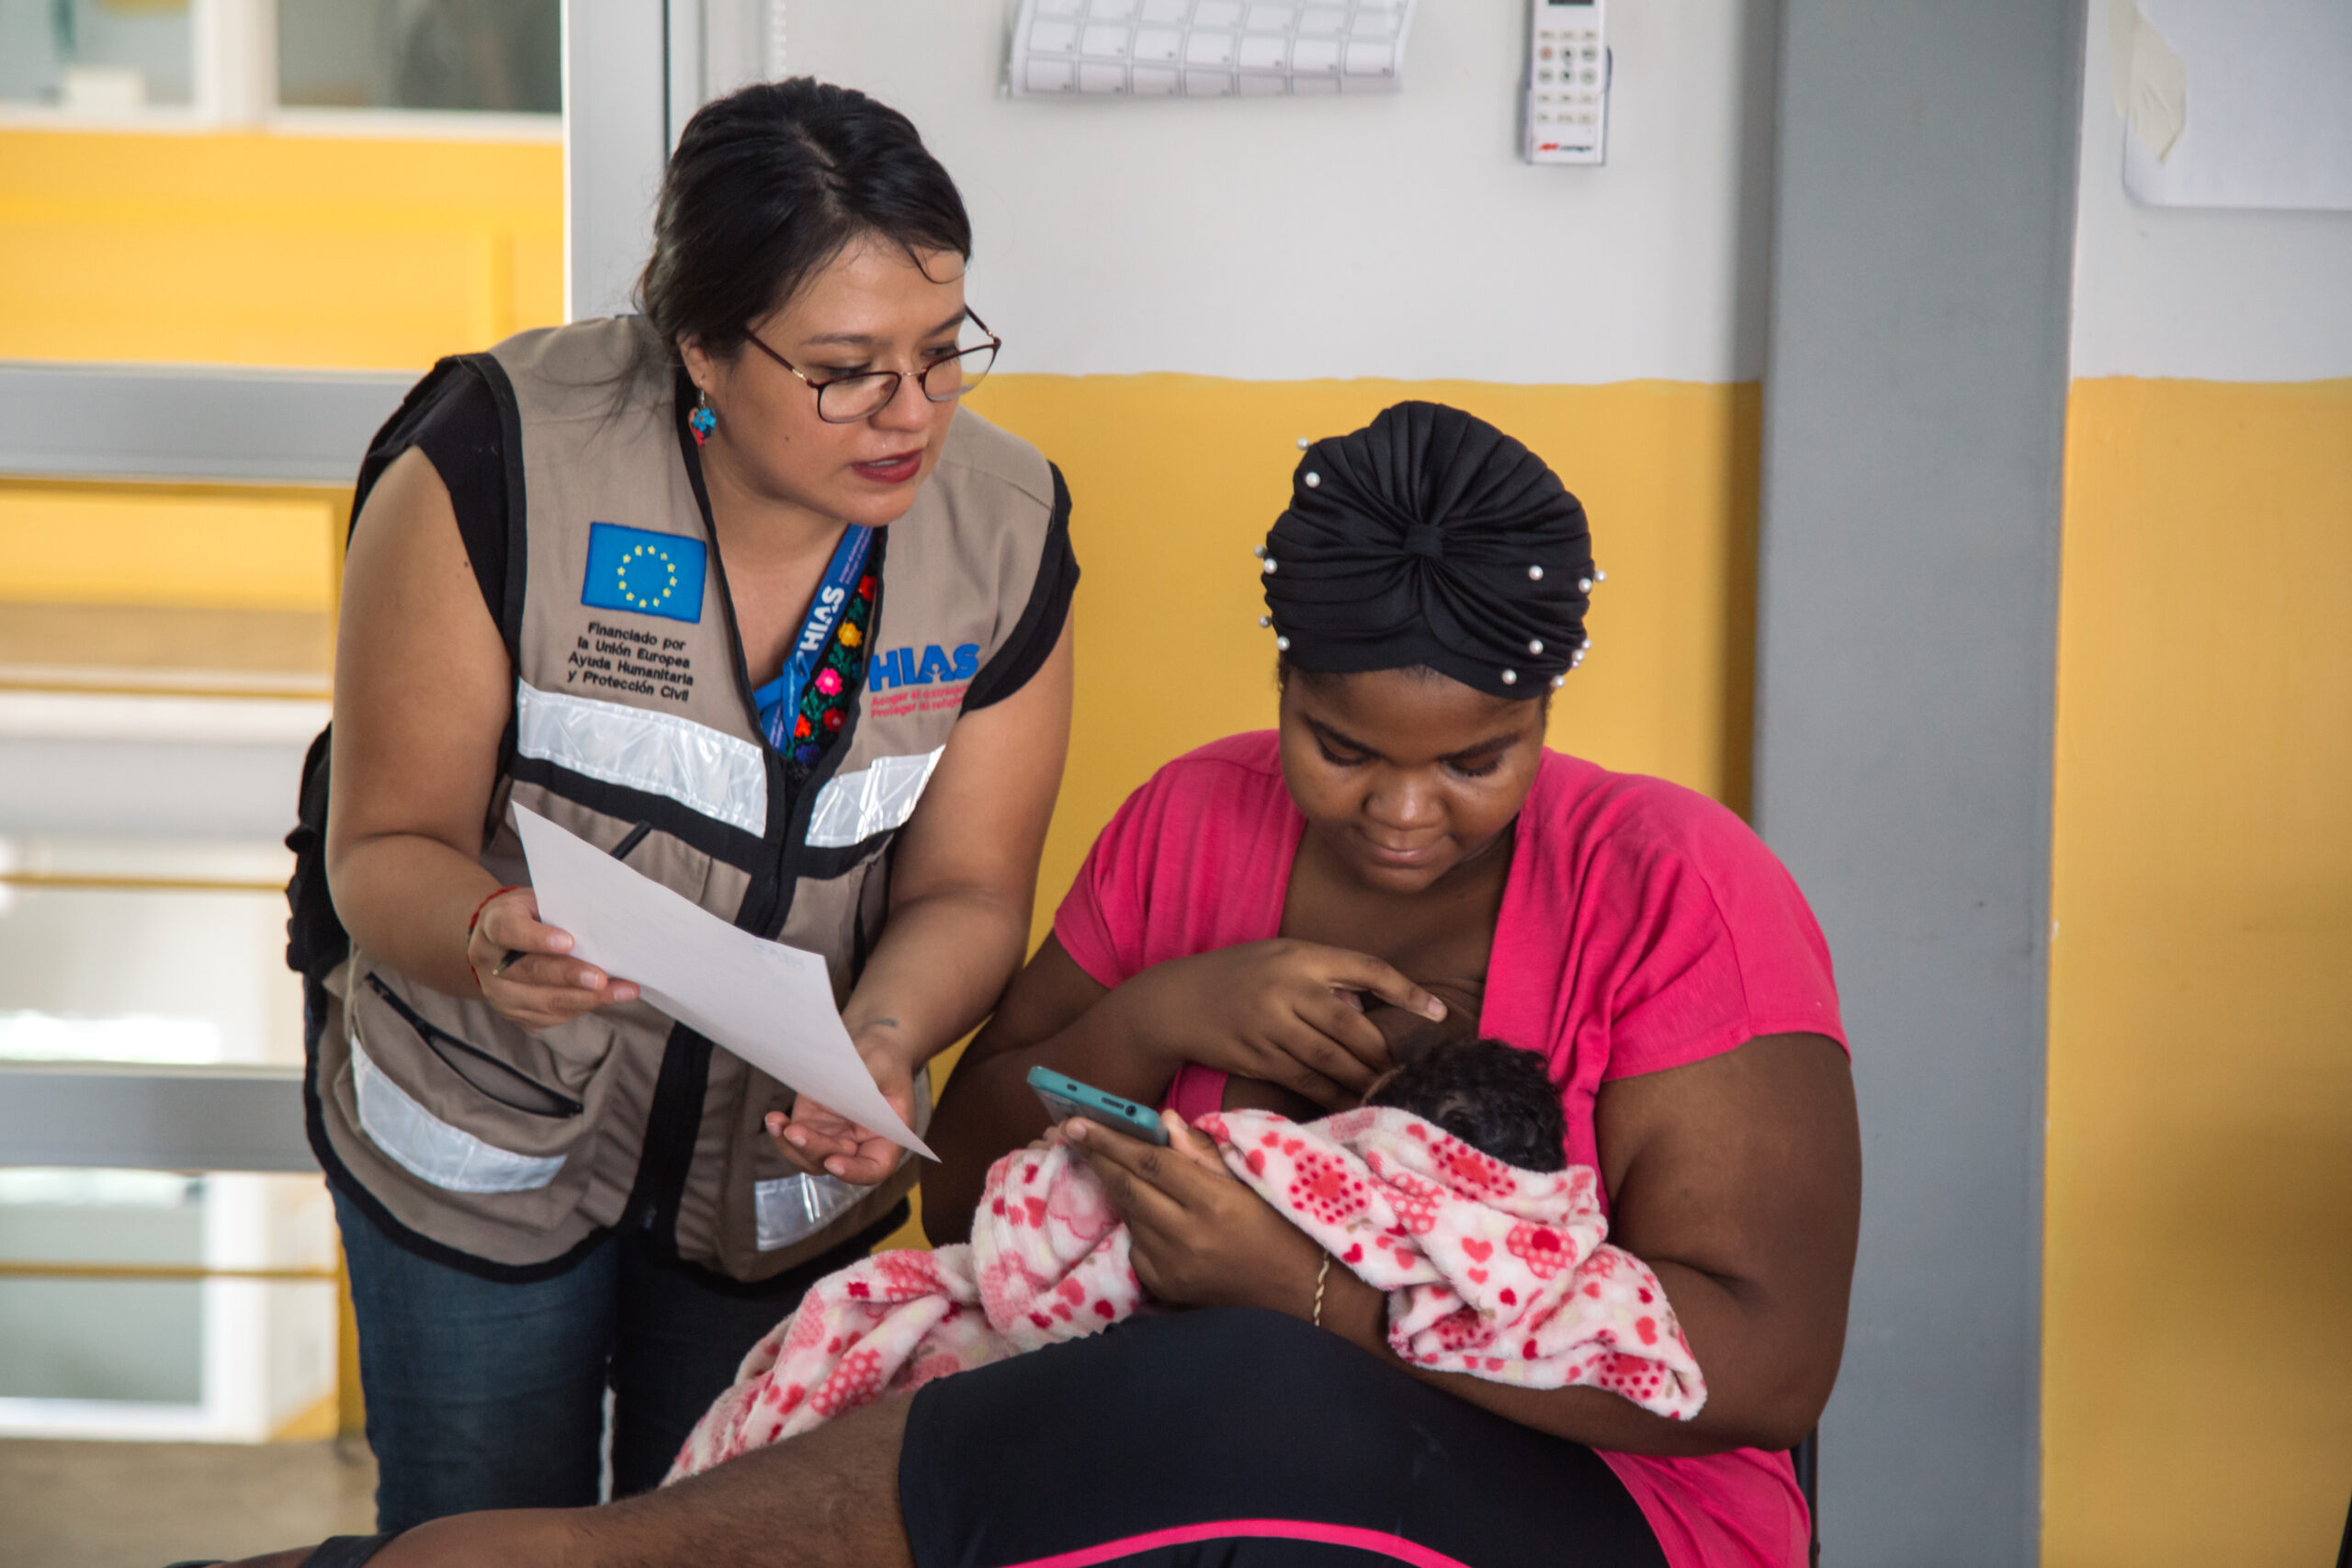 Paula García, a staff member of HIAS Mexico, provides assistance to Darle from Haiti during a workshop held at the 